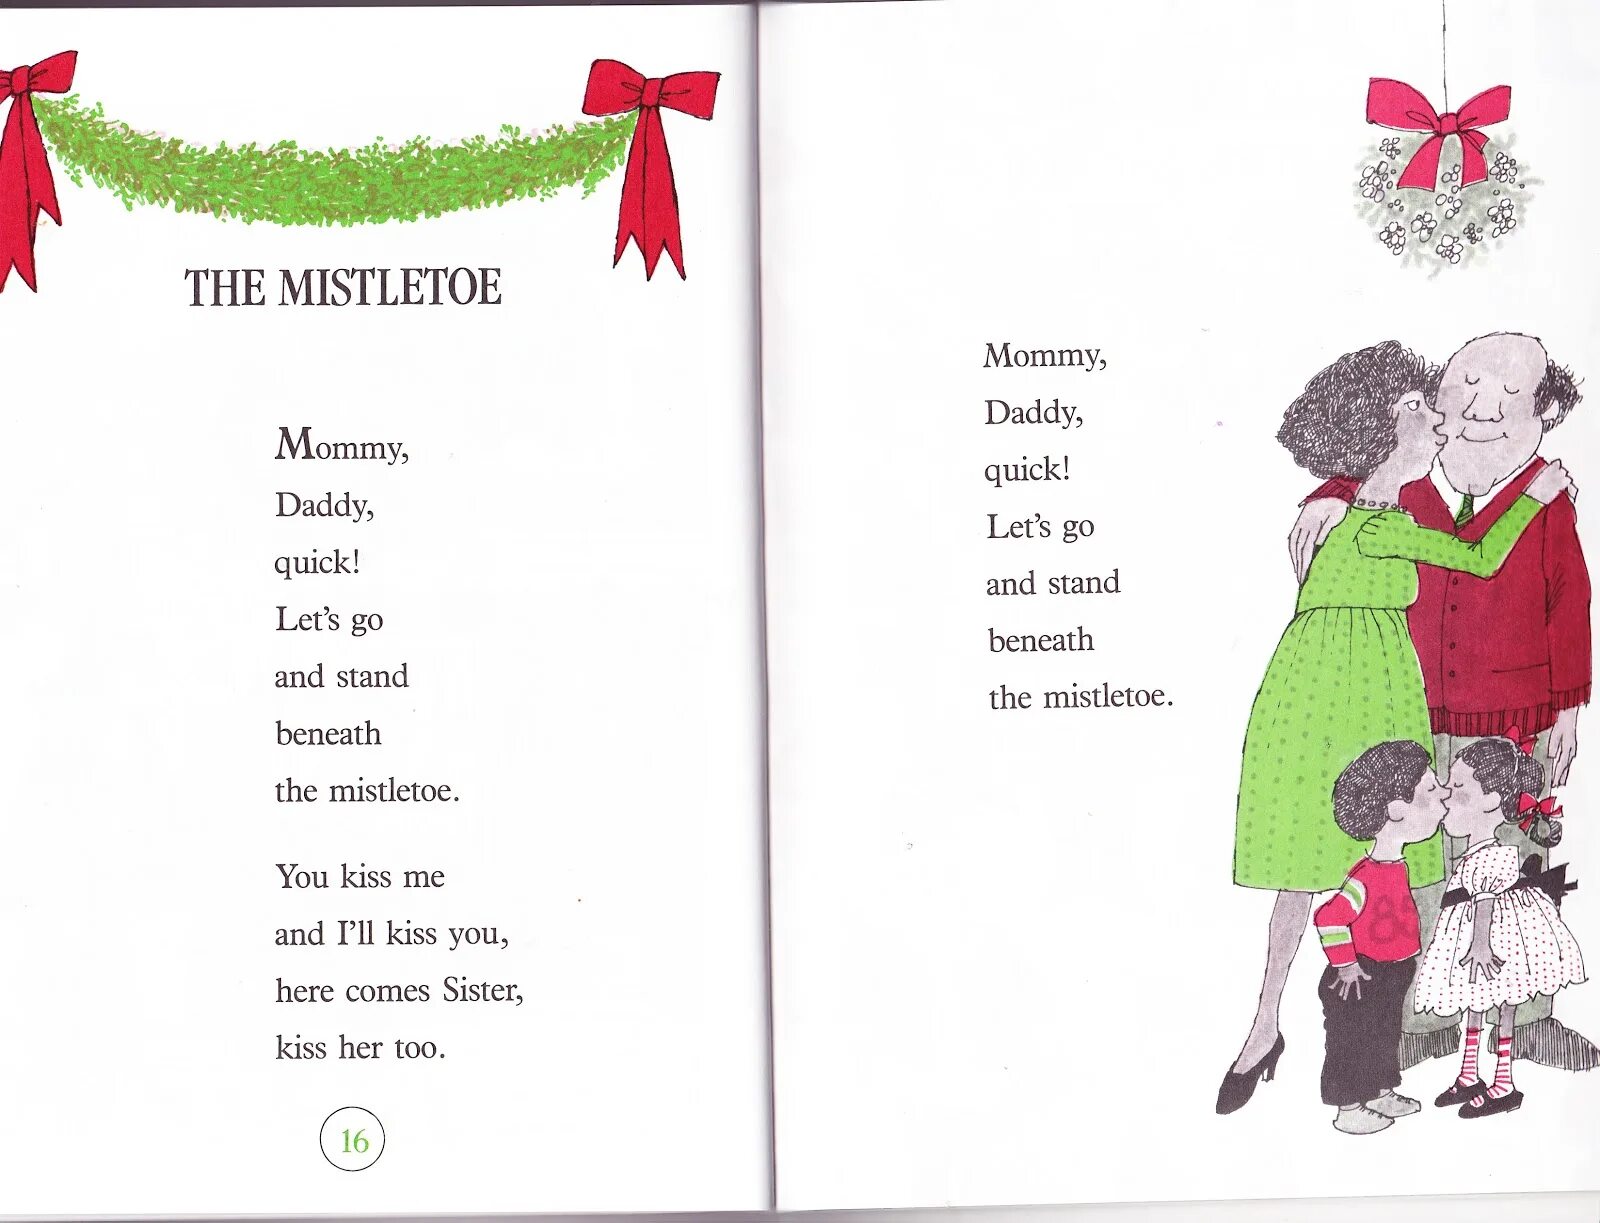 Christmas poems. New year poems for Kids. Christmas poems for Kids. Poems in English about Christmas.